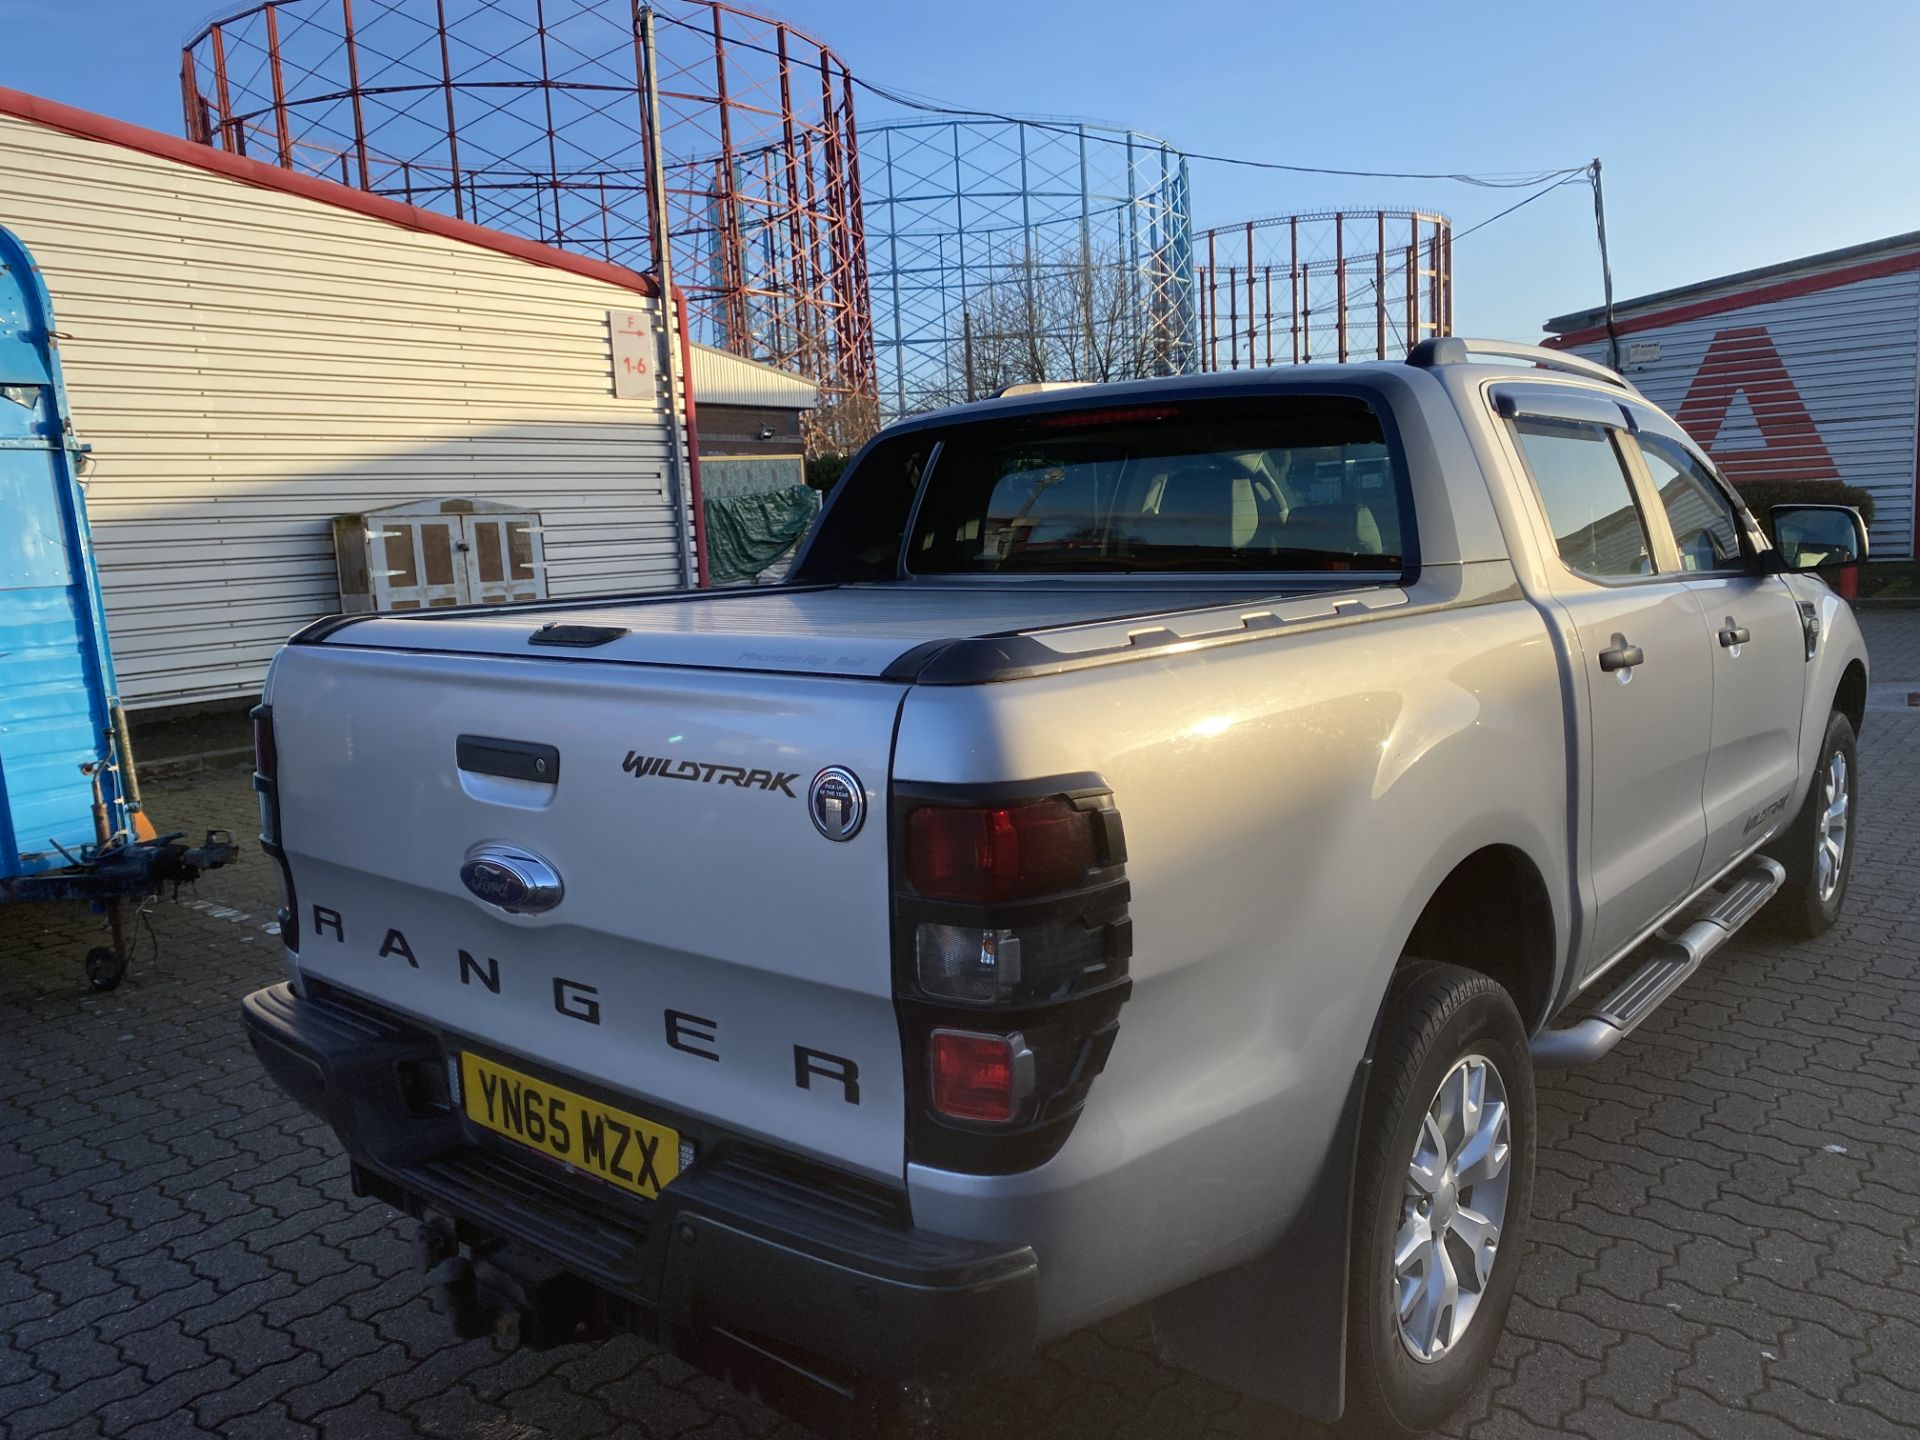 Ford Ranger Wildtrak 4 x 4 3.2 TDCI 6 Speed Automatic Double Cab Pick Up Truck, Silver - Image 10 of 30